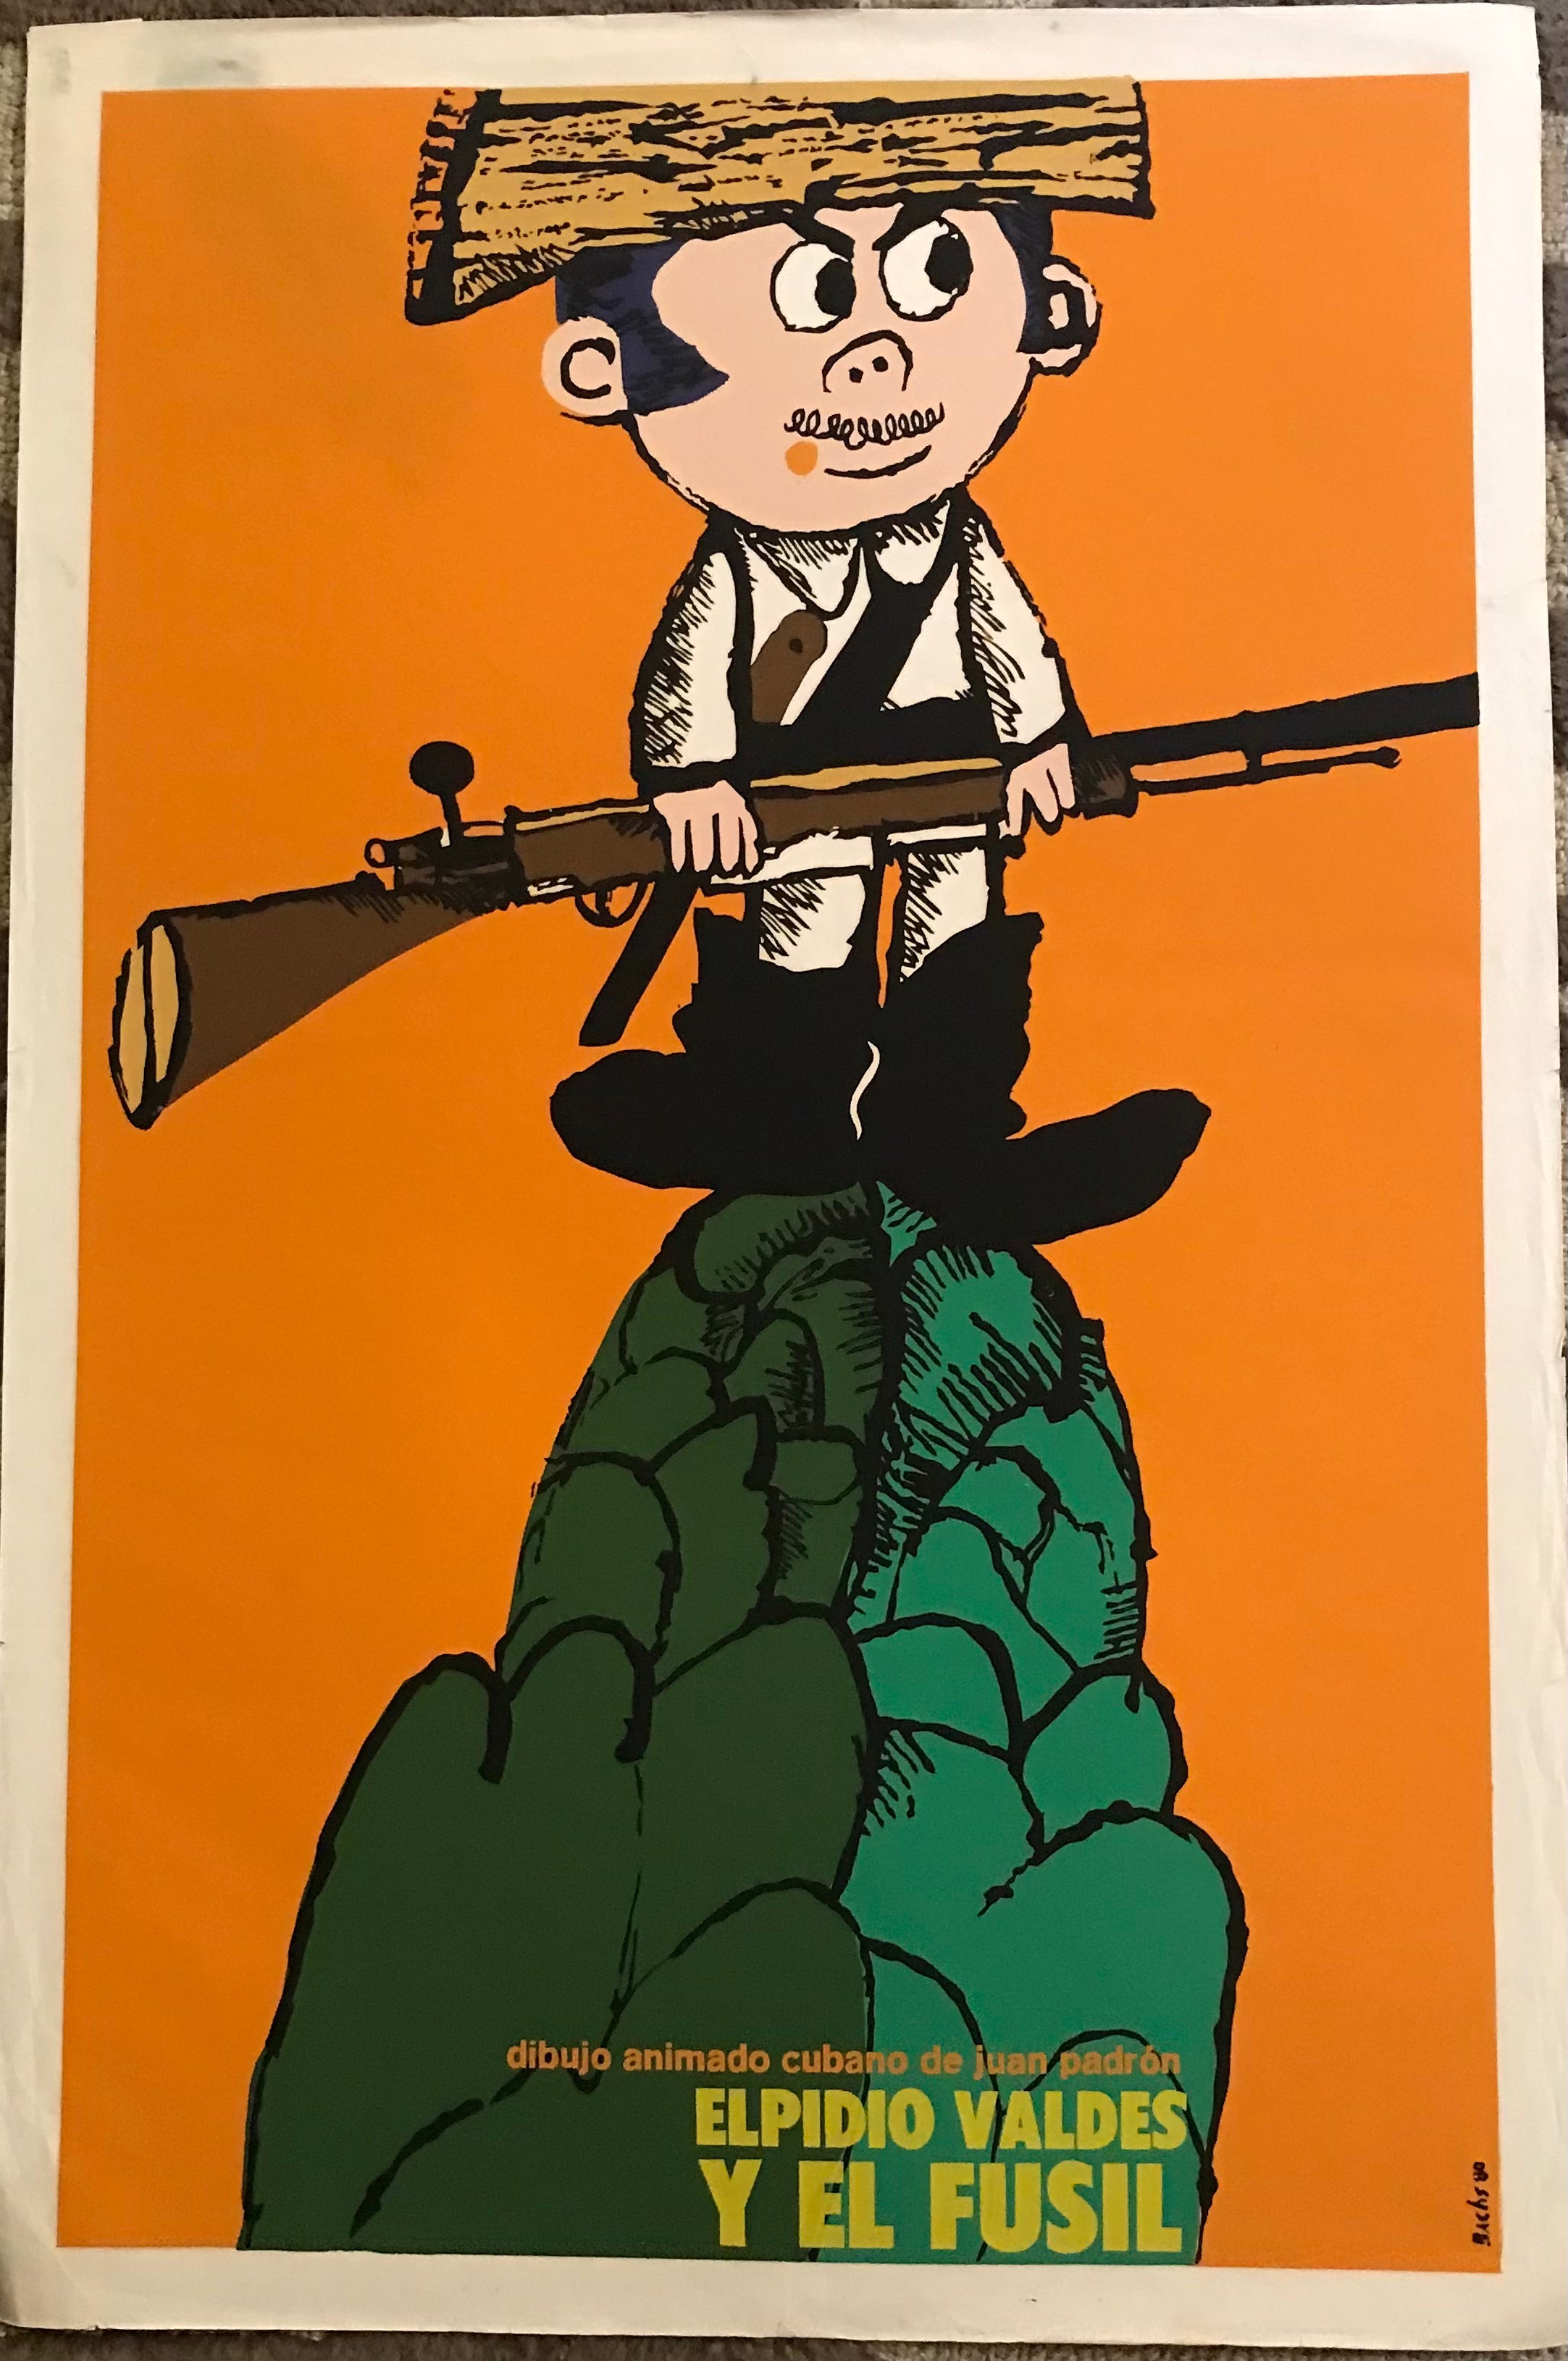 1980 Cuban vintage silkscreen poster for the animated movie from Juan Padron  “Elpidio Valdes y el Fusil” designed by Bachs for ICAIC.  The short propaganda movie is about an  imaginary story of a Mambi (Cuban revolutionary during the War of